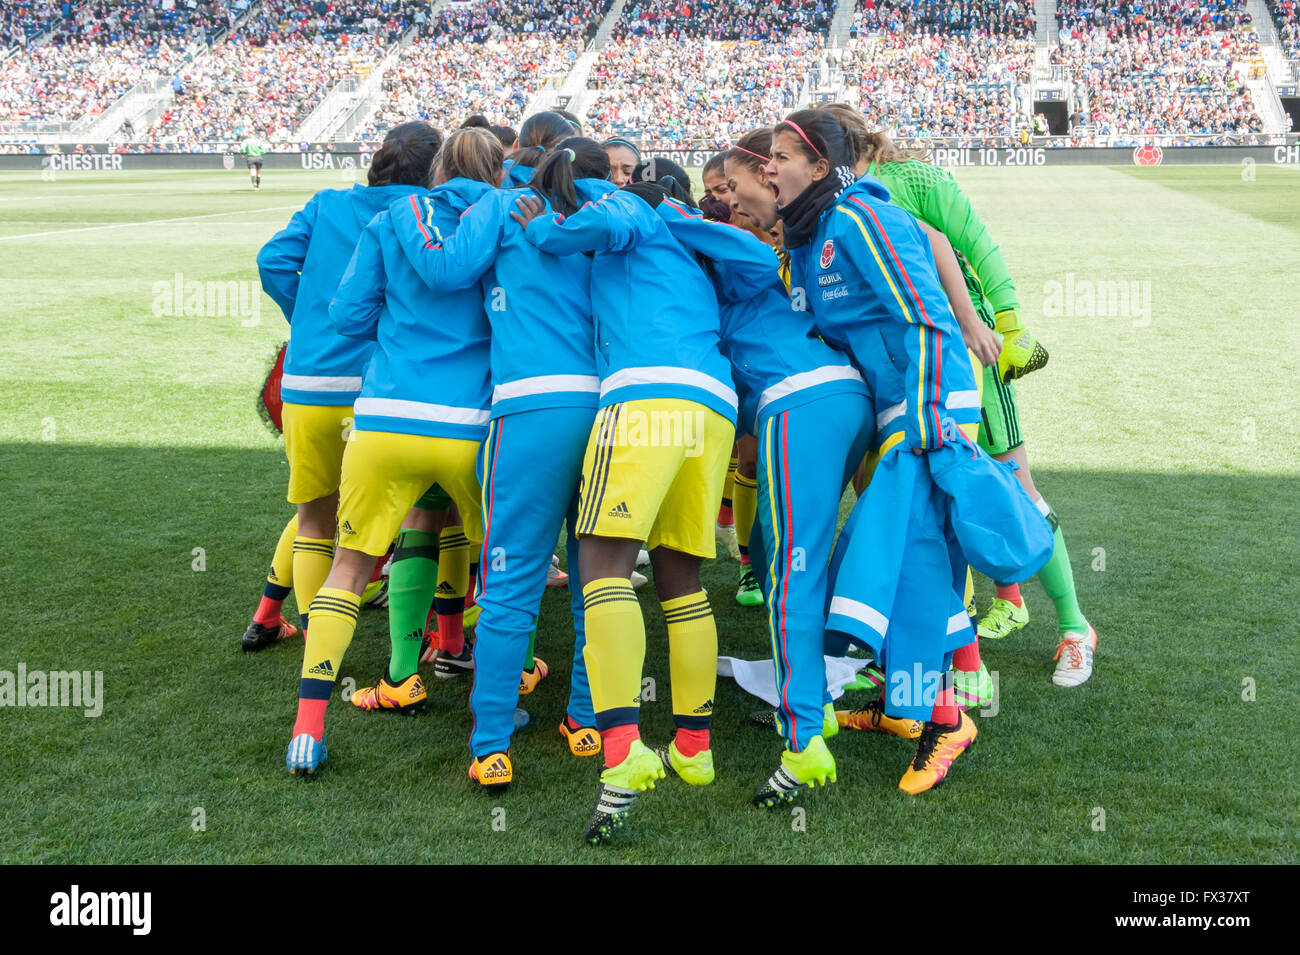 Women's football / soccer - Columbia's Women's National team huddle up before the game © Don Mennig/Alamy Live News Stock Photo